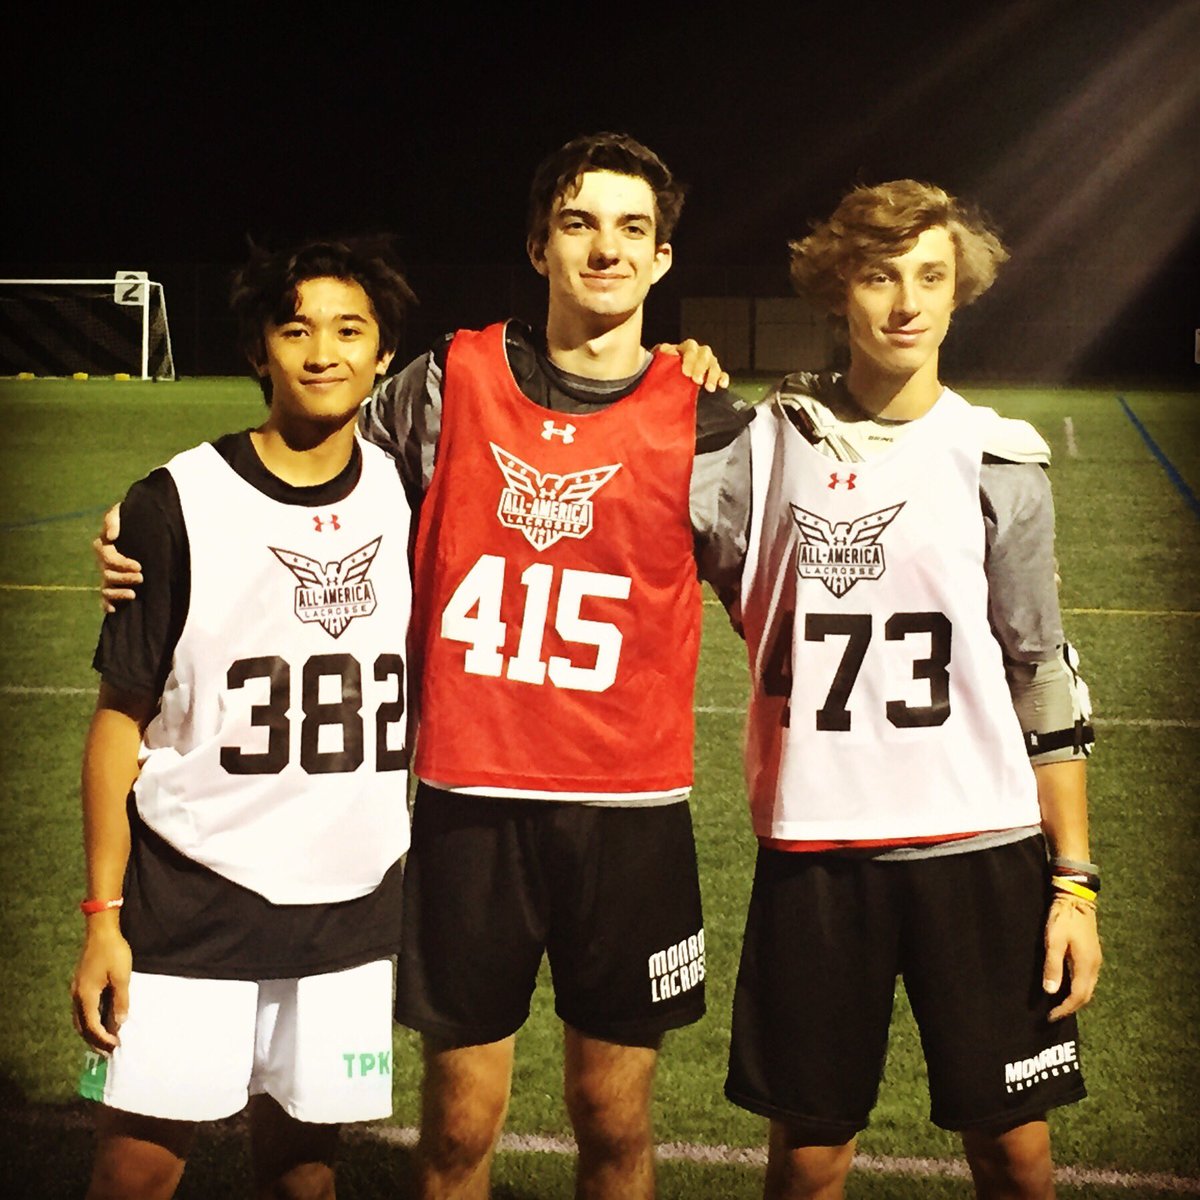 💯Turnpikers representing at @UALacrosse @CSELax Underclassman Jersey Tryouts. Proud to see Josh, Mathew, and Zach being selected to play in the Top 40 game in front of over 100 college coaches Tuesday night! #TPKPride #GetSomeTPK @BookerCorrigan